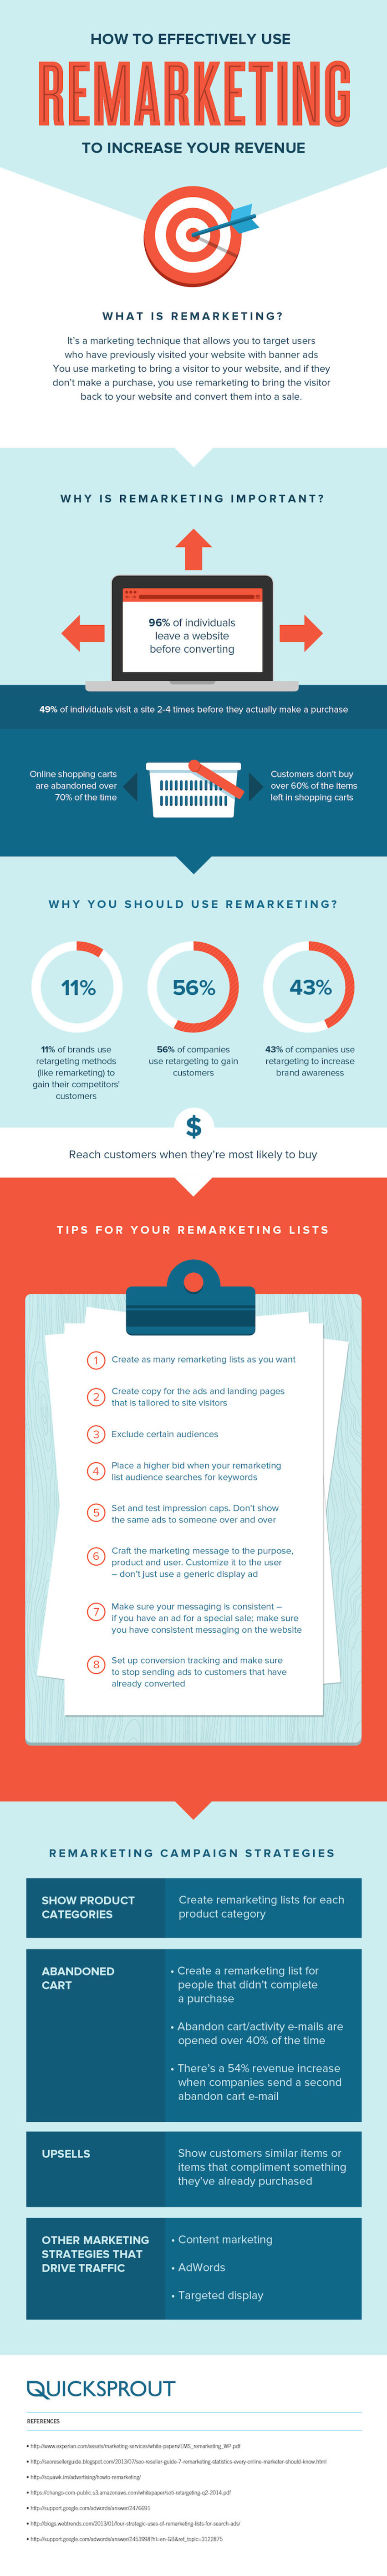 Remarketing - What it is and Why it is Important - #infographic - Digital Information World | The MarTech Digest | Scoop.it